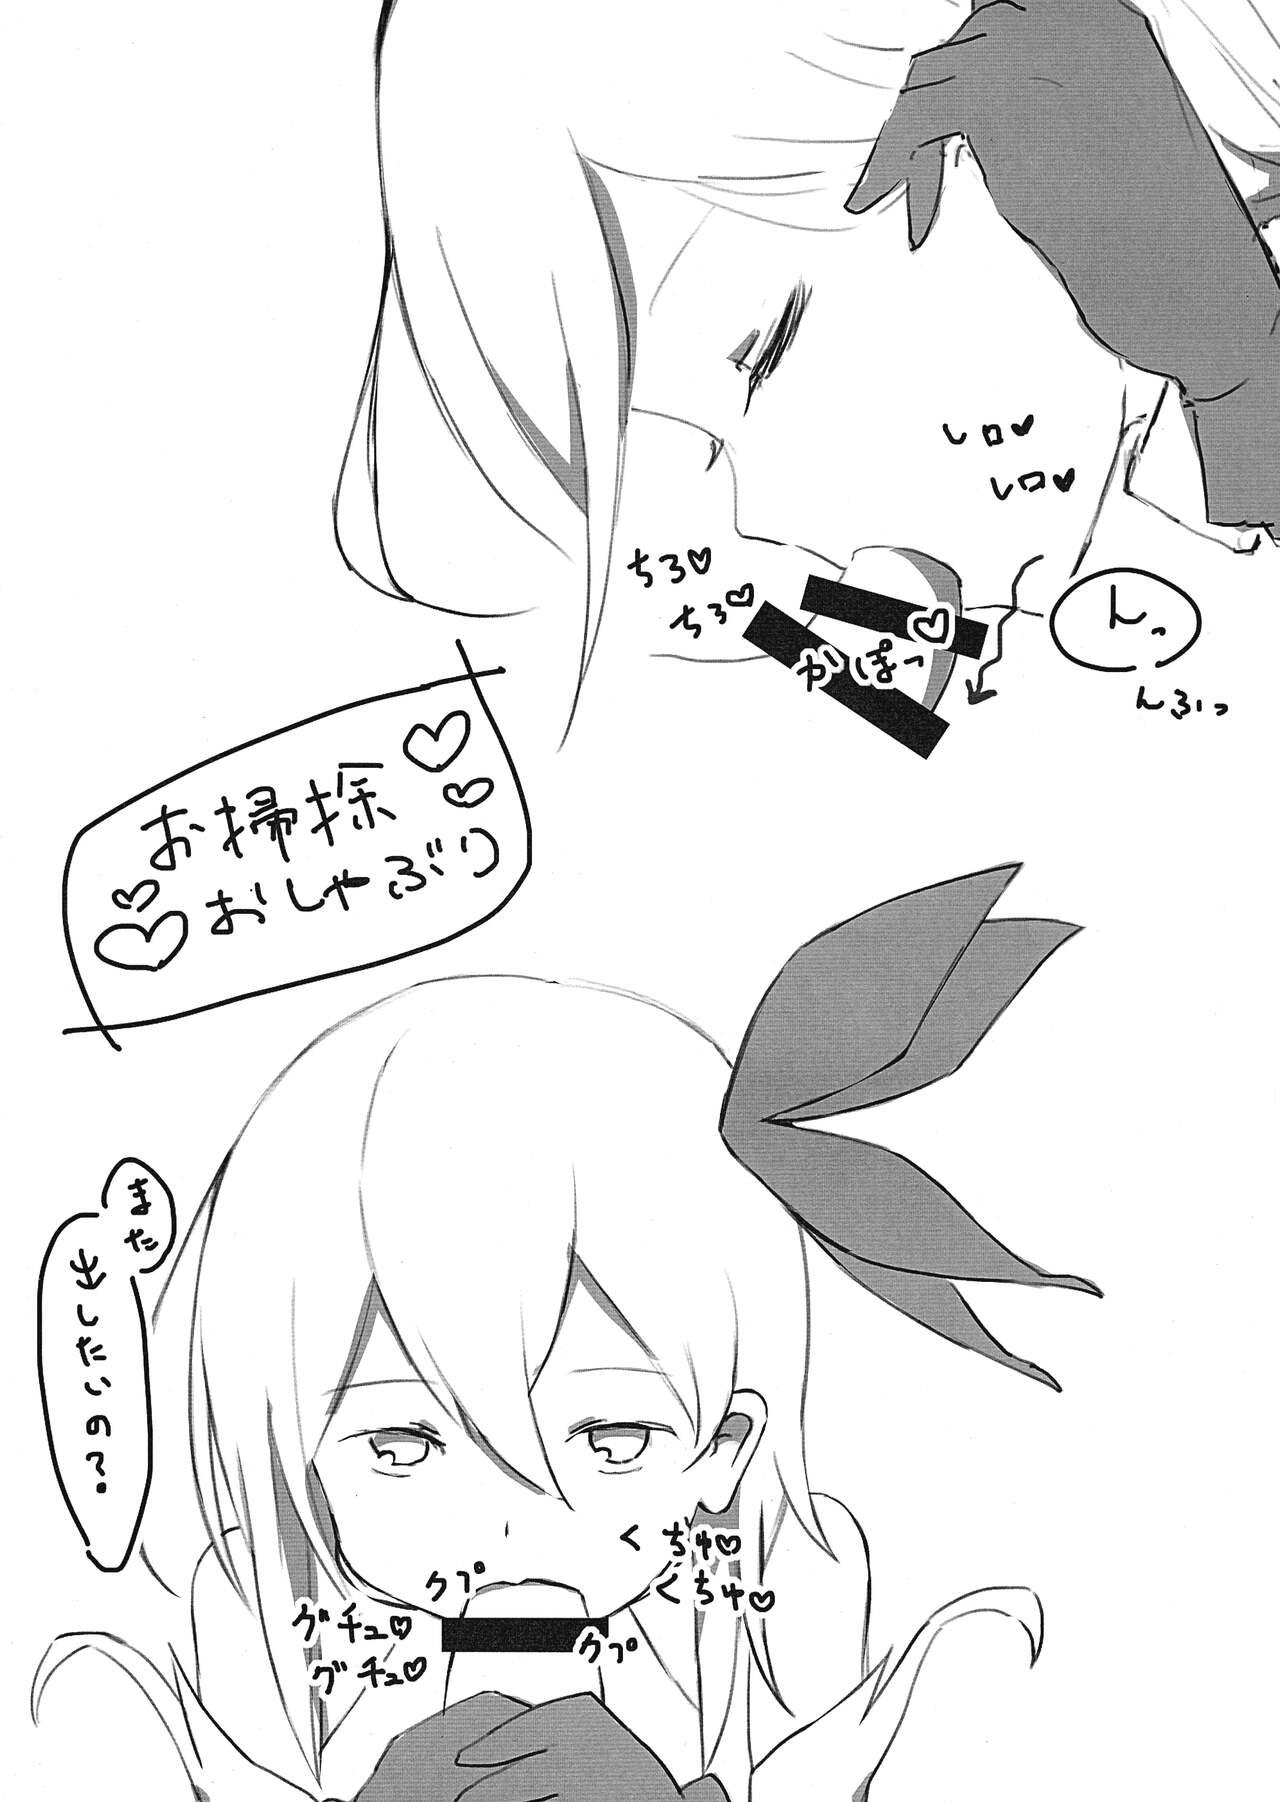 Babysitter Sepas!! - Selector infected wixoss Gay Kissing - Page 5